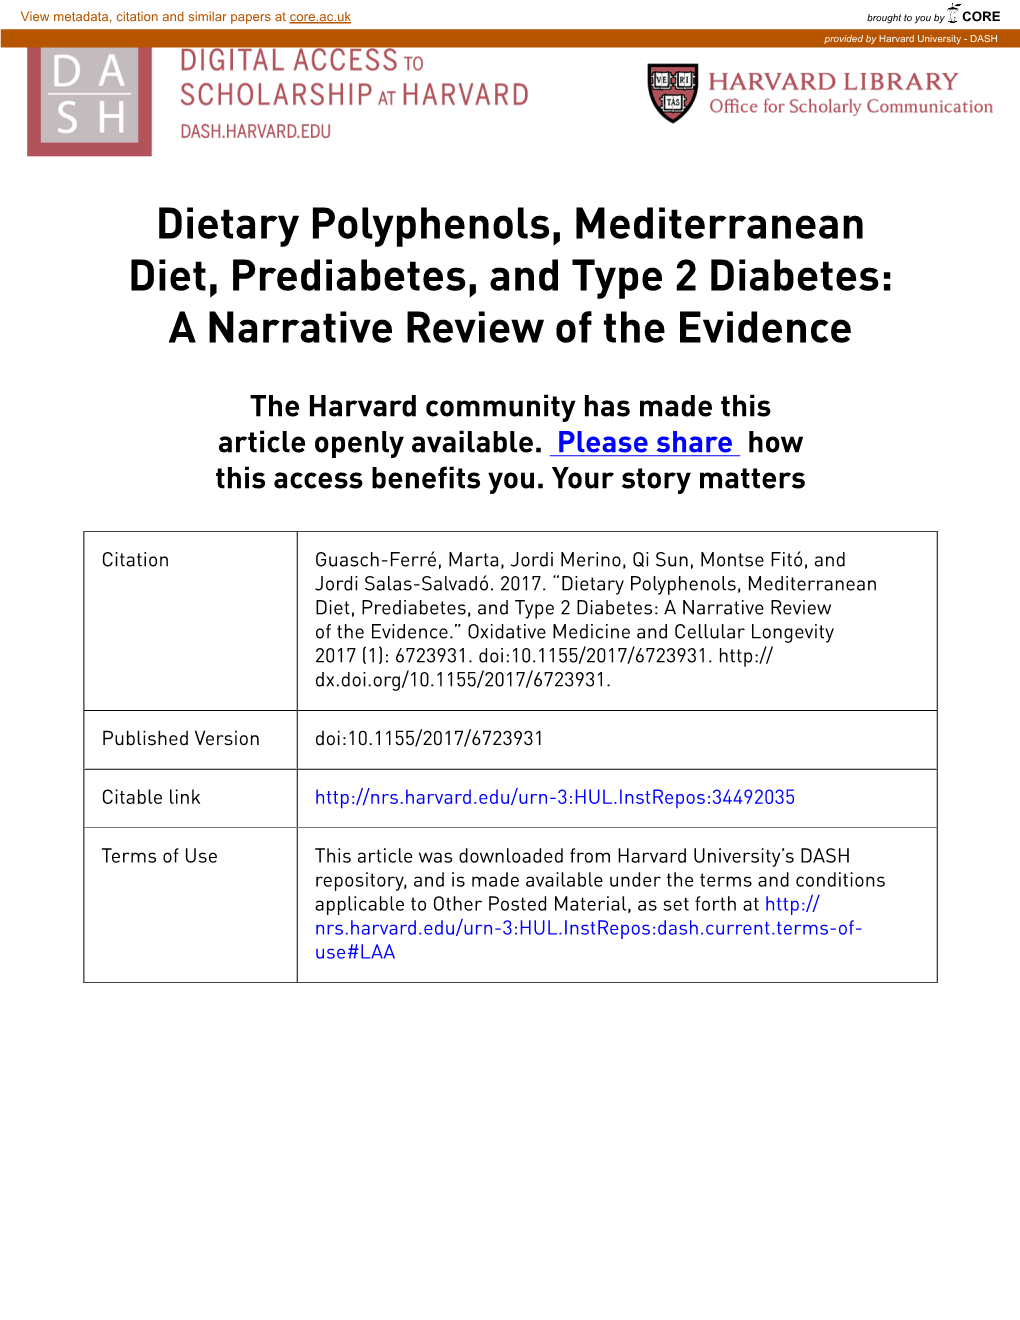 Dietary Polyphenols, Mediterranean Diet, Prediabetes, and Type 2 Diabetes: a Narrative Review of the Evidence